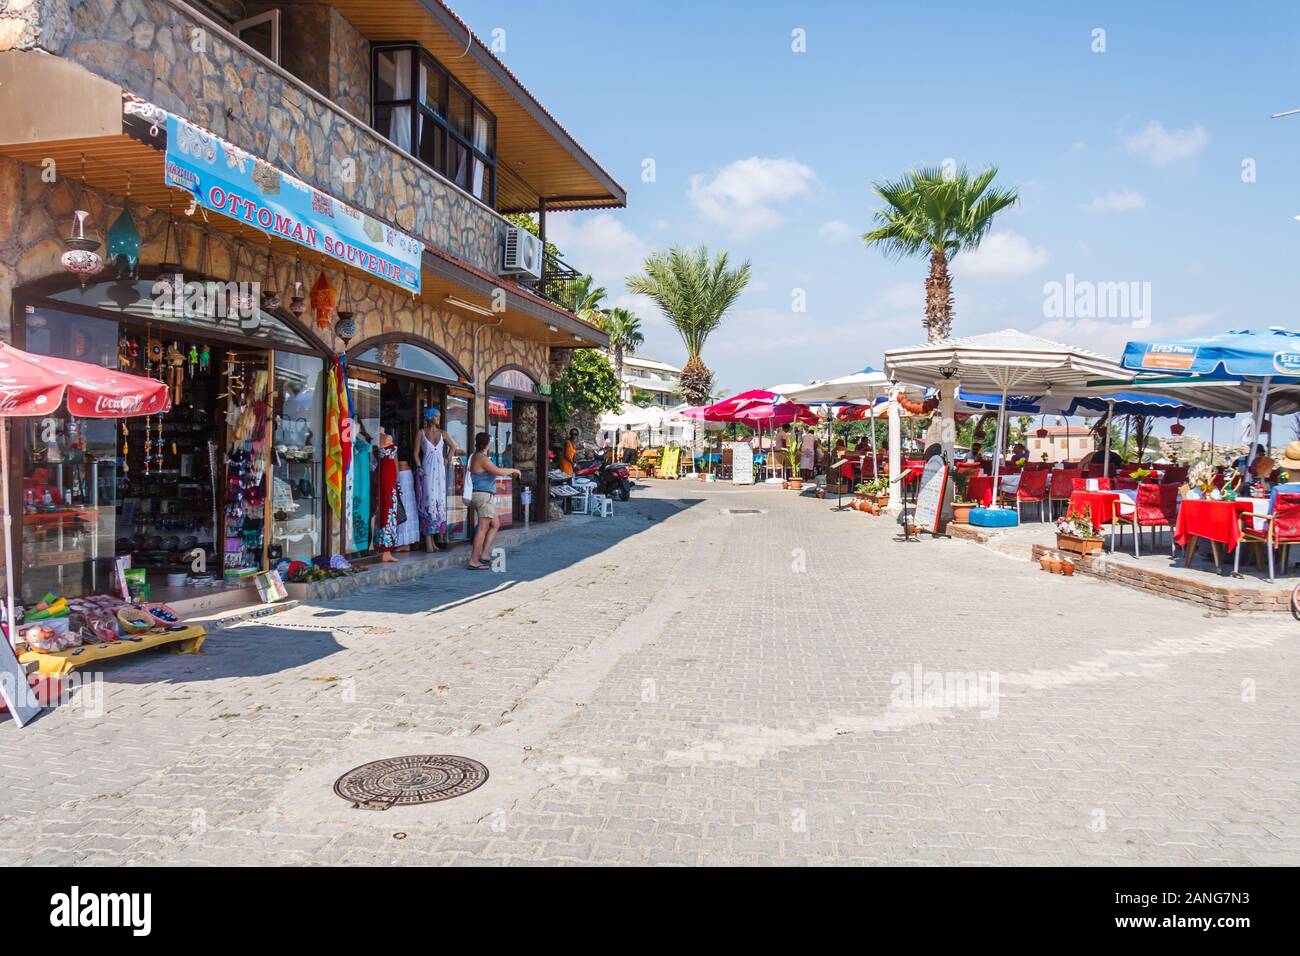 Side, Turkey - September 9th 2011: Shops and beachside restaurants. The town is a populat tourist destination. Stock Photo